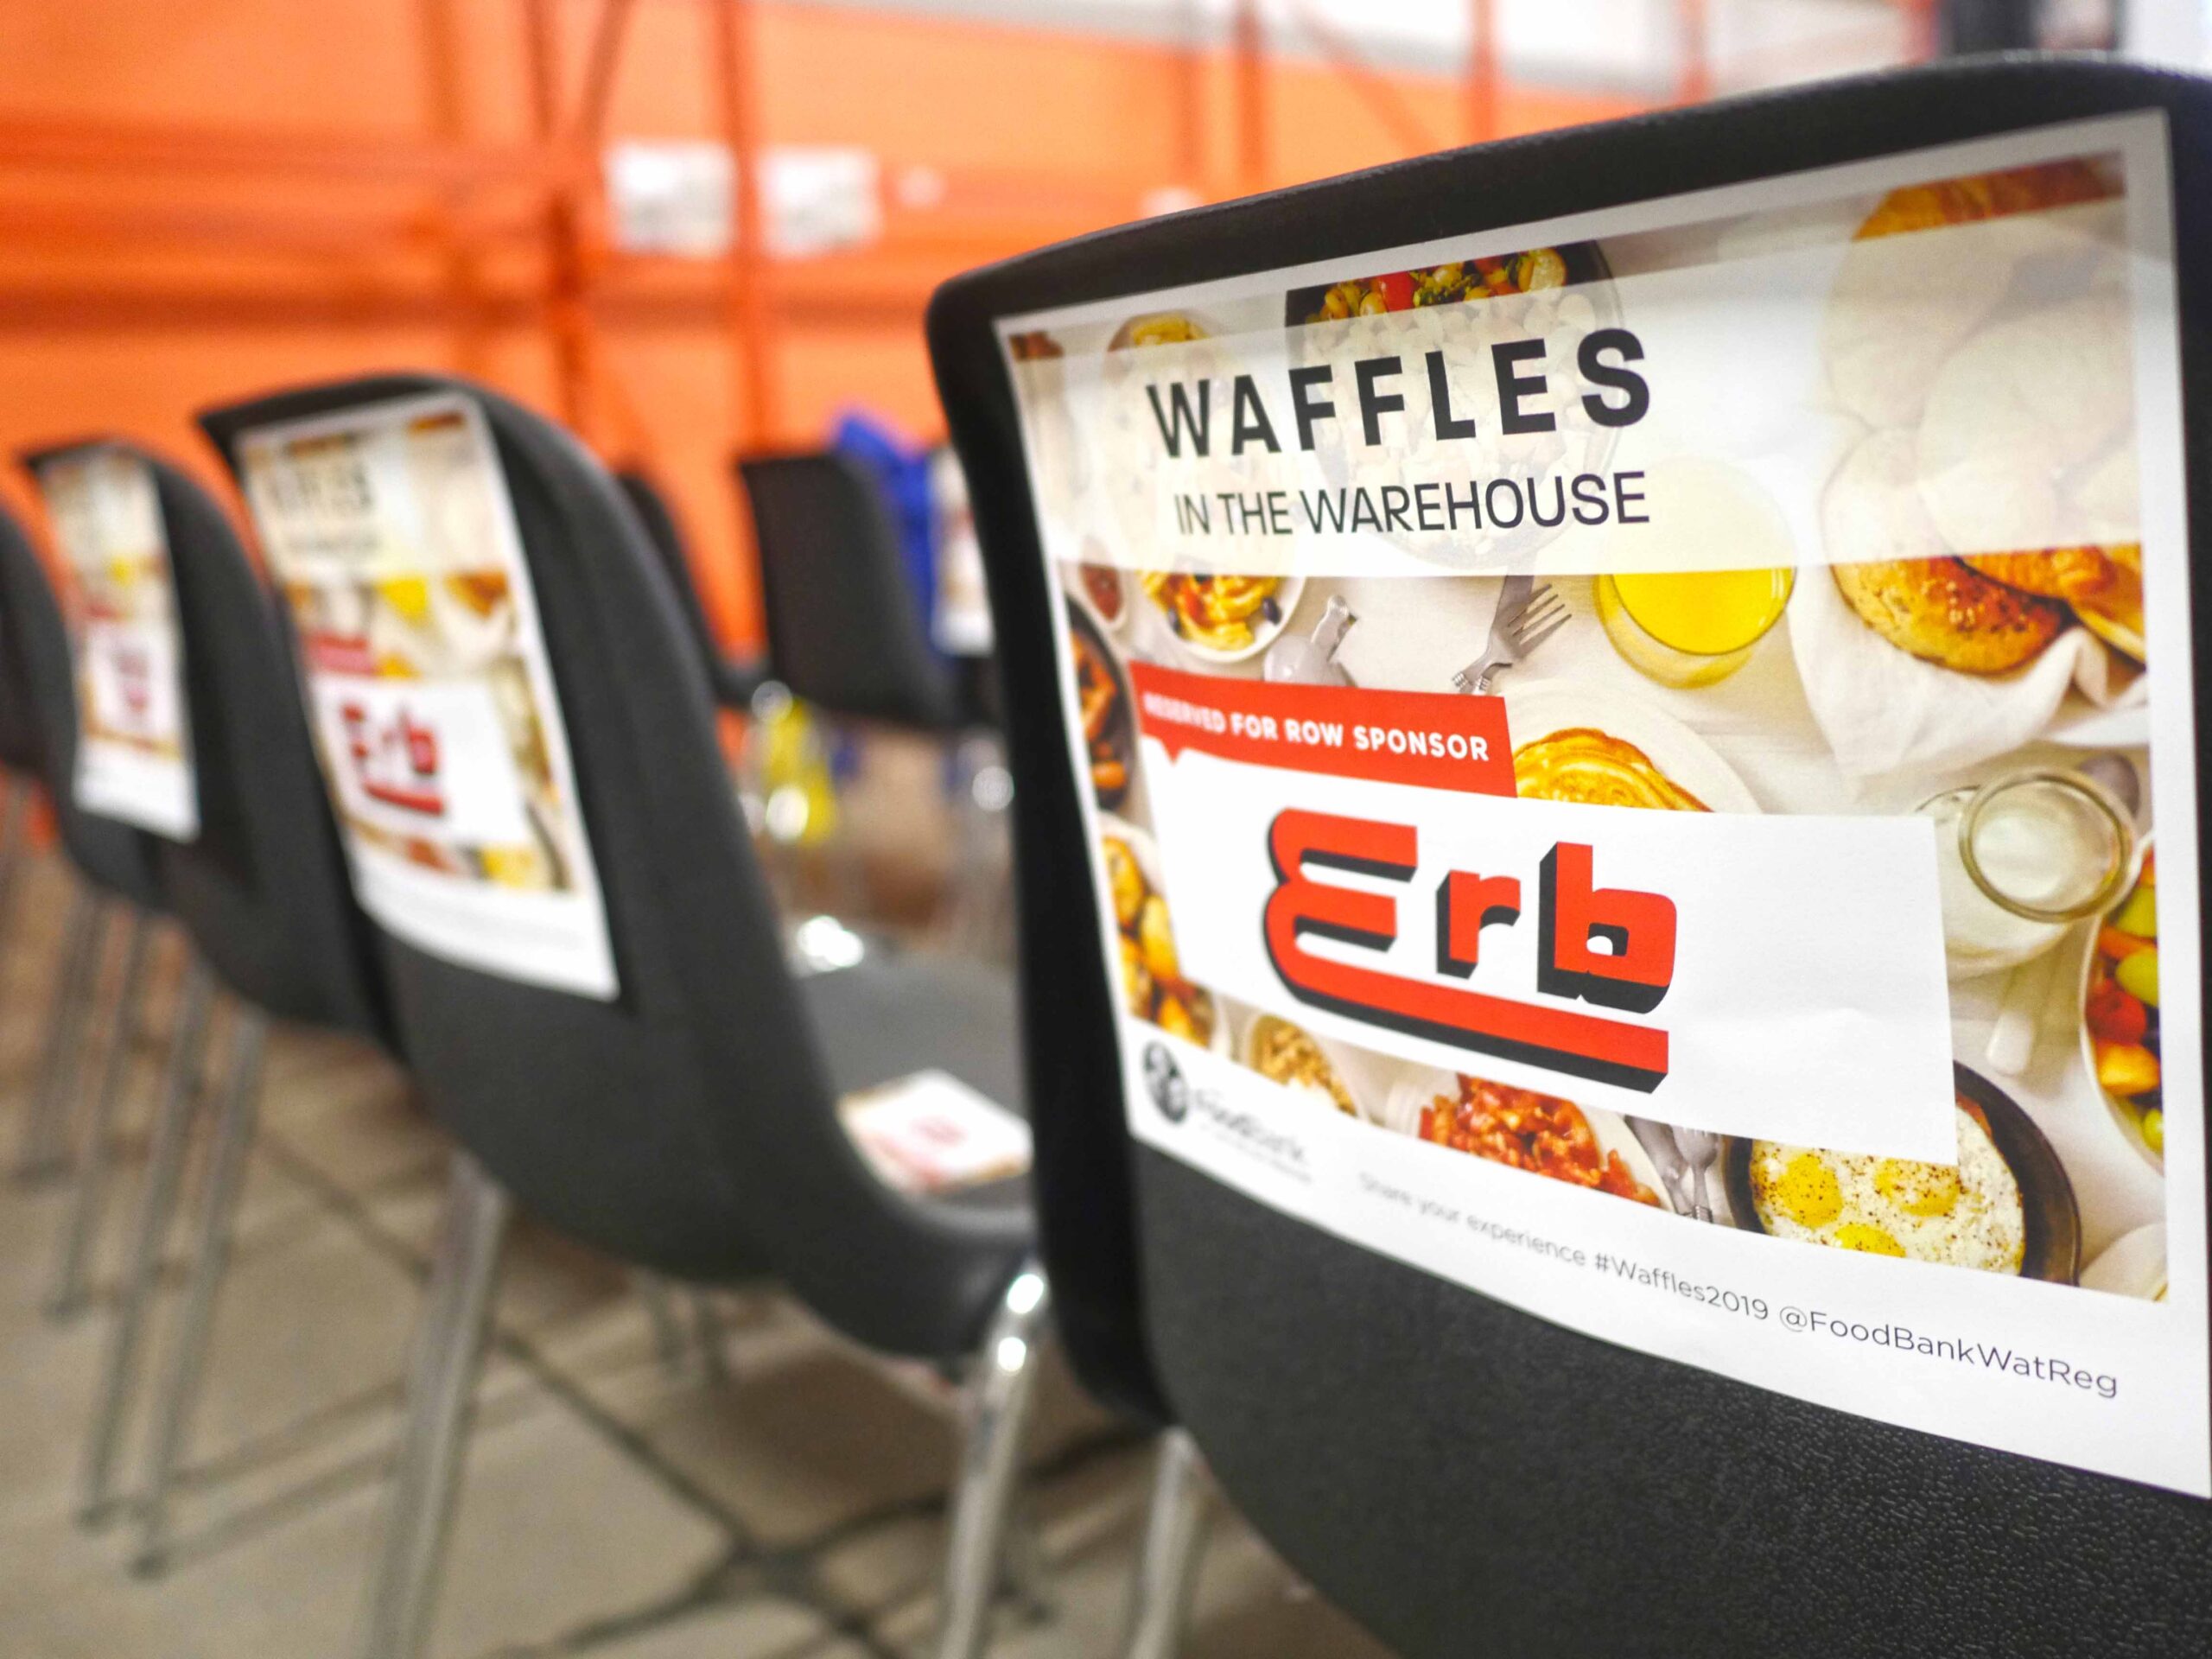 WAFFLES IN THE WAREHOUSE – ERB TRANSPORT PARTNERSHIP